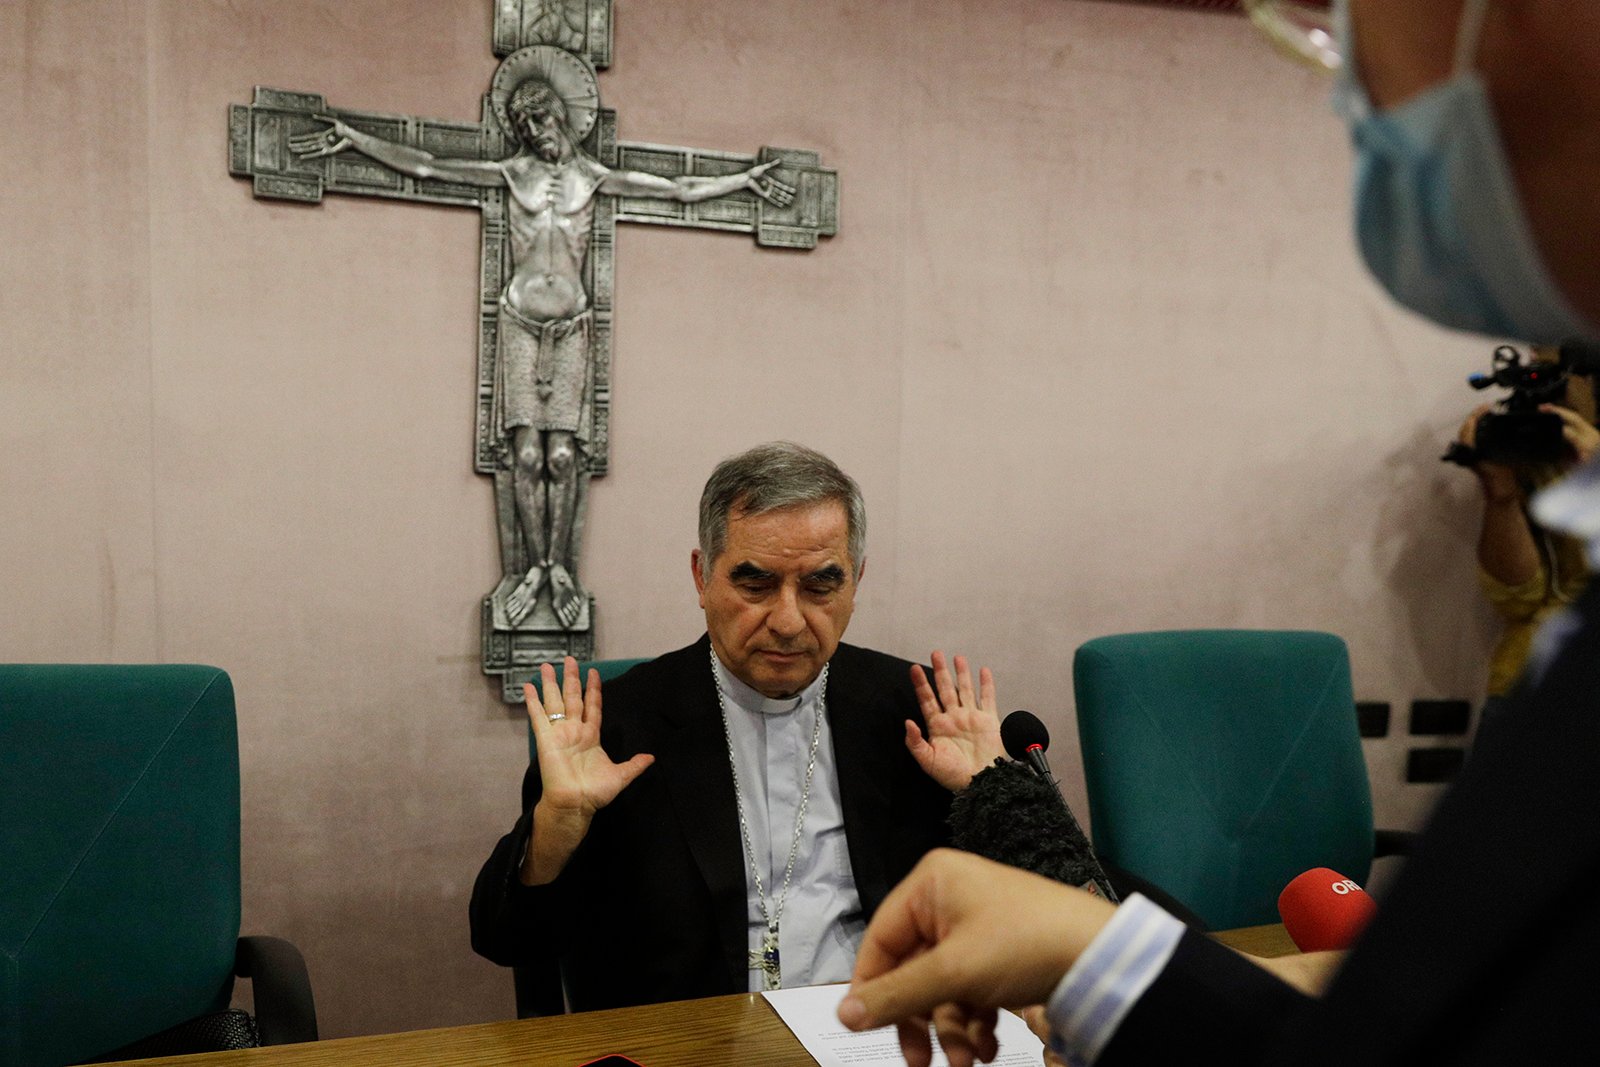 Cardinal Angelo Becciu talks to journalists during a news conference in Rome, in this Sept. 25, 2020, file photo. Pope Francis authorized spending up to 1 million euro to free a Colombian nun kidnapped by al-Qaida-linked militants in Mali, Becciu testified at the Vatican’s big financial fraud trial May 5, 2022, revealing previously top secret negotiations that Francis authorized to hire a British security and intelligence firm to find the nun and pay for her liberation. (AP Photo/Gregorio Borgia)